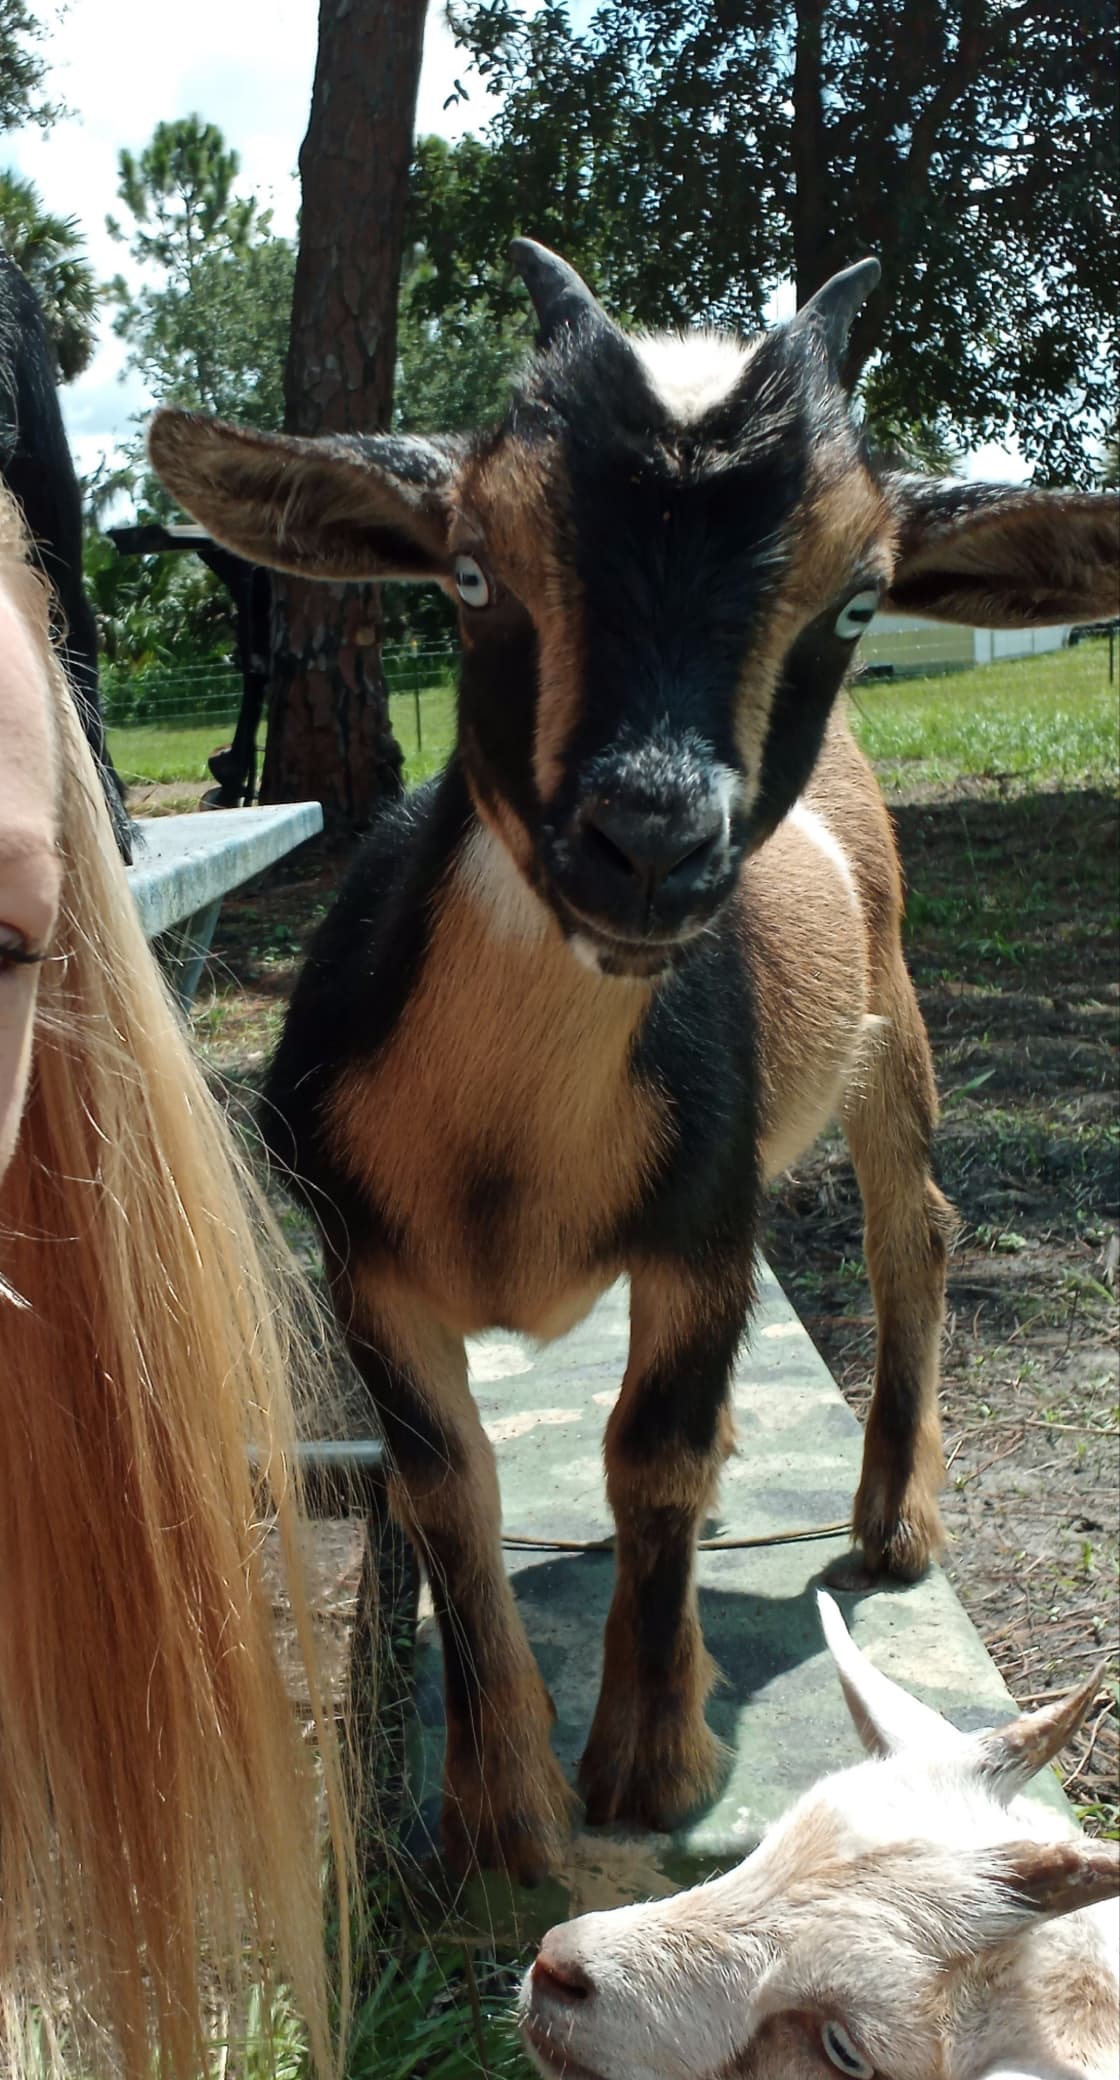 this is "Scape". one of our 4 new goats.